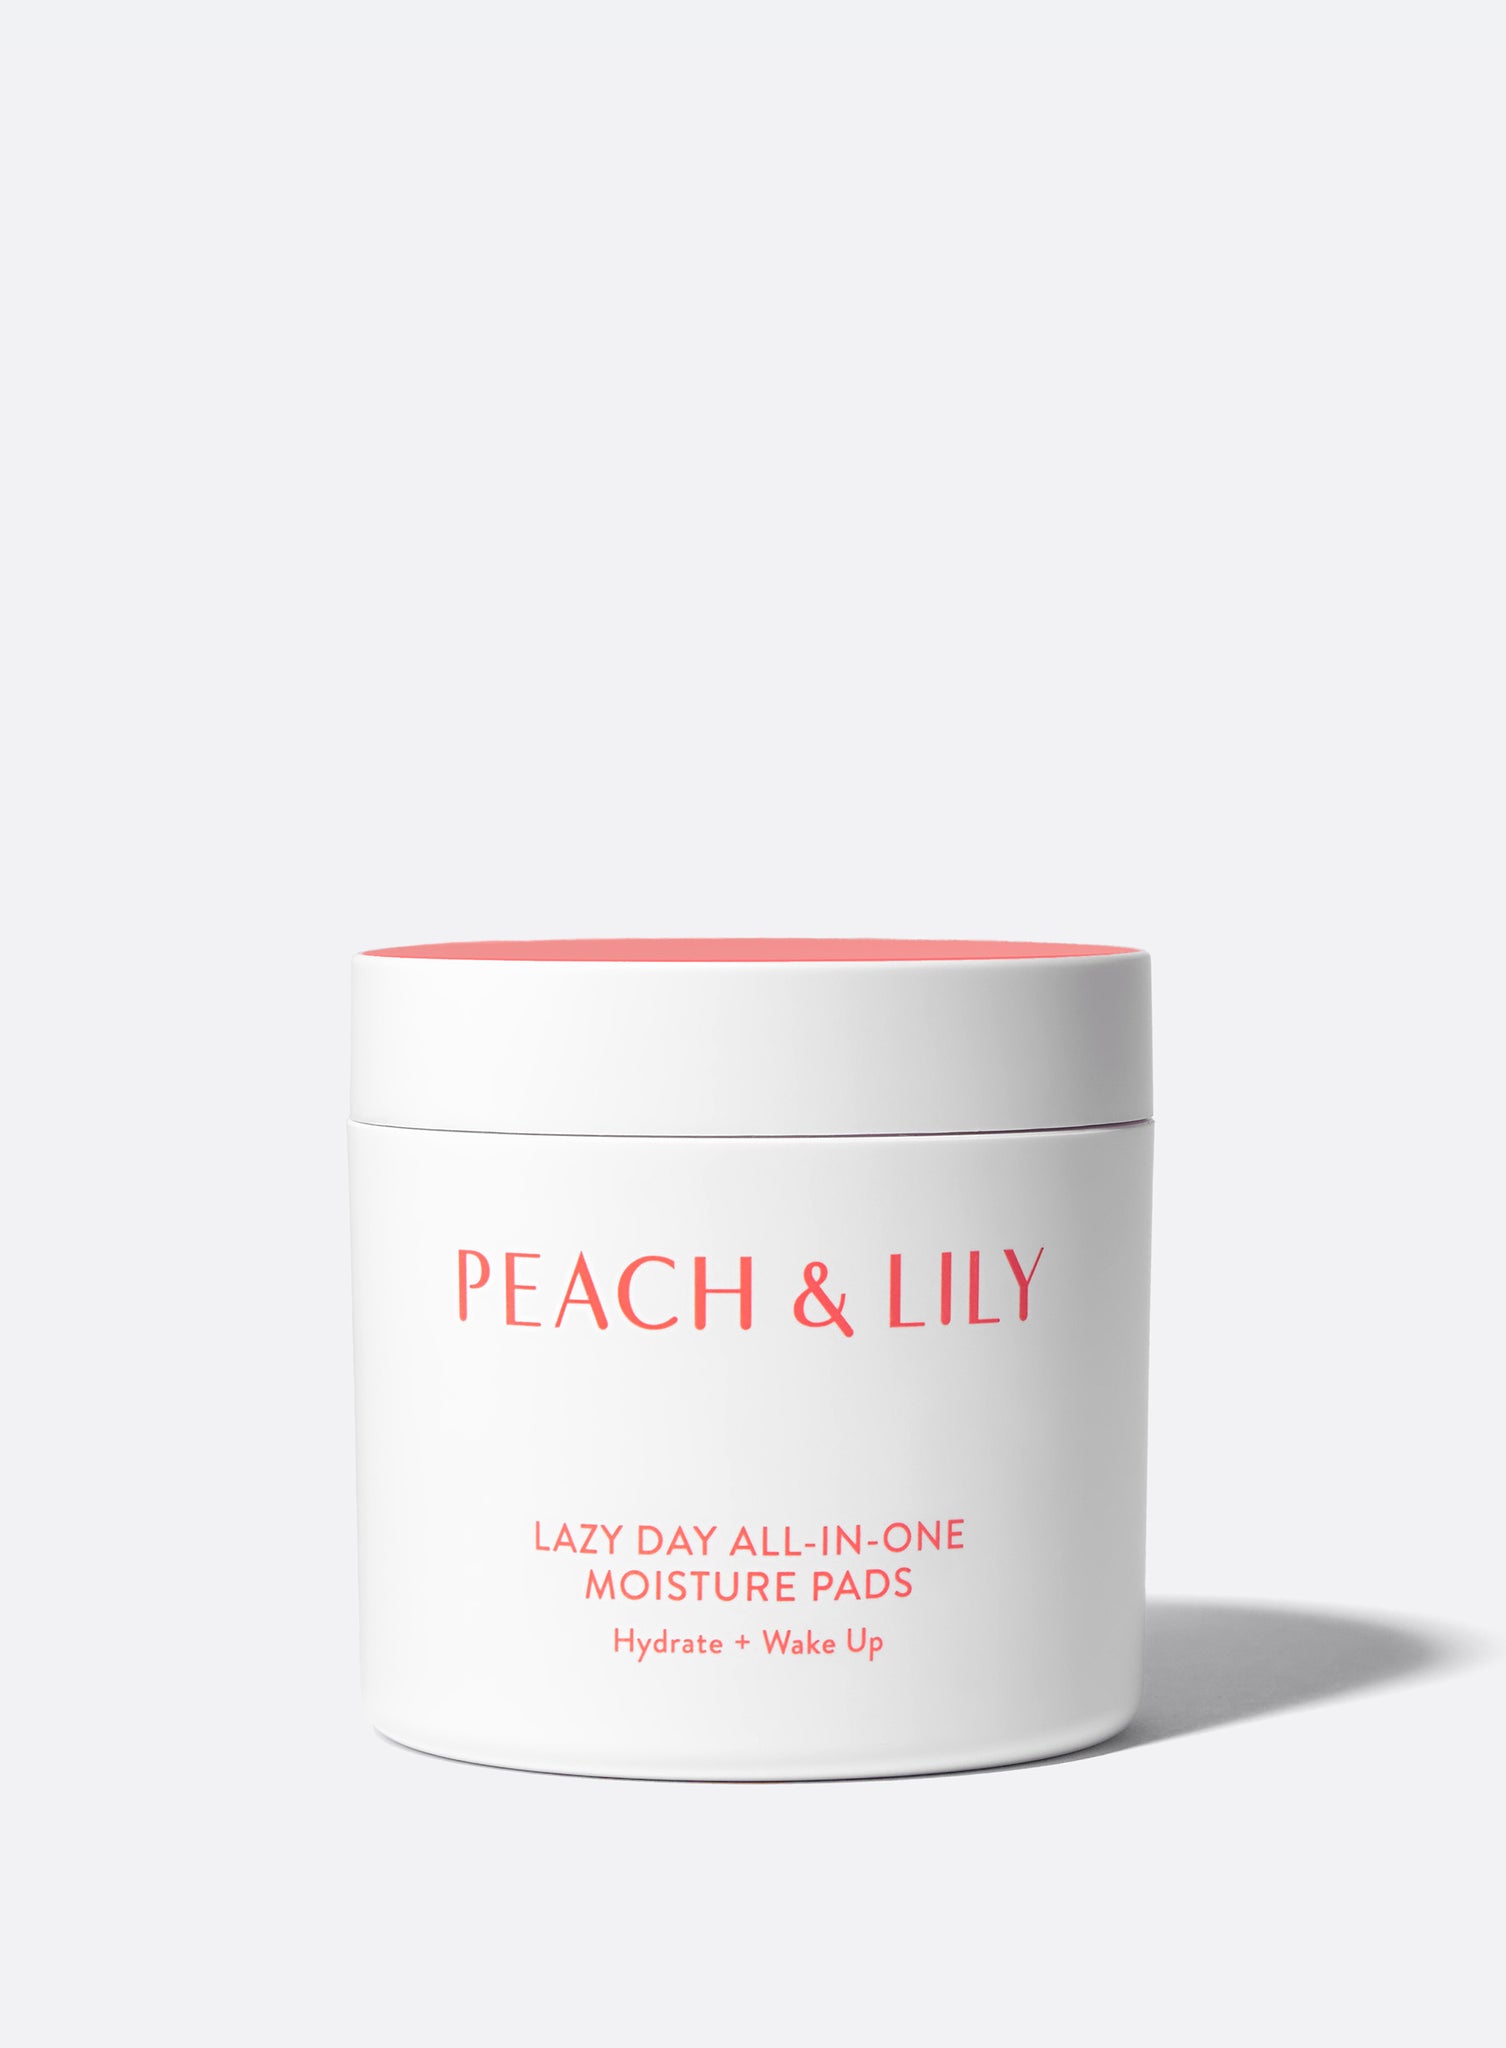 Lazy Day All-In-One Moisture Pads